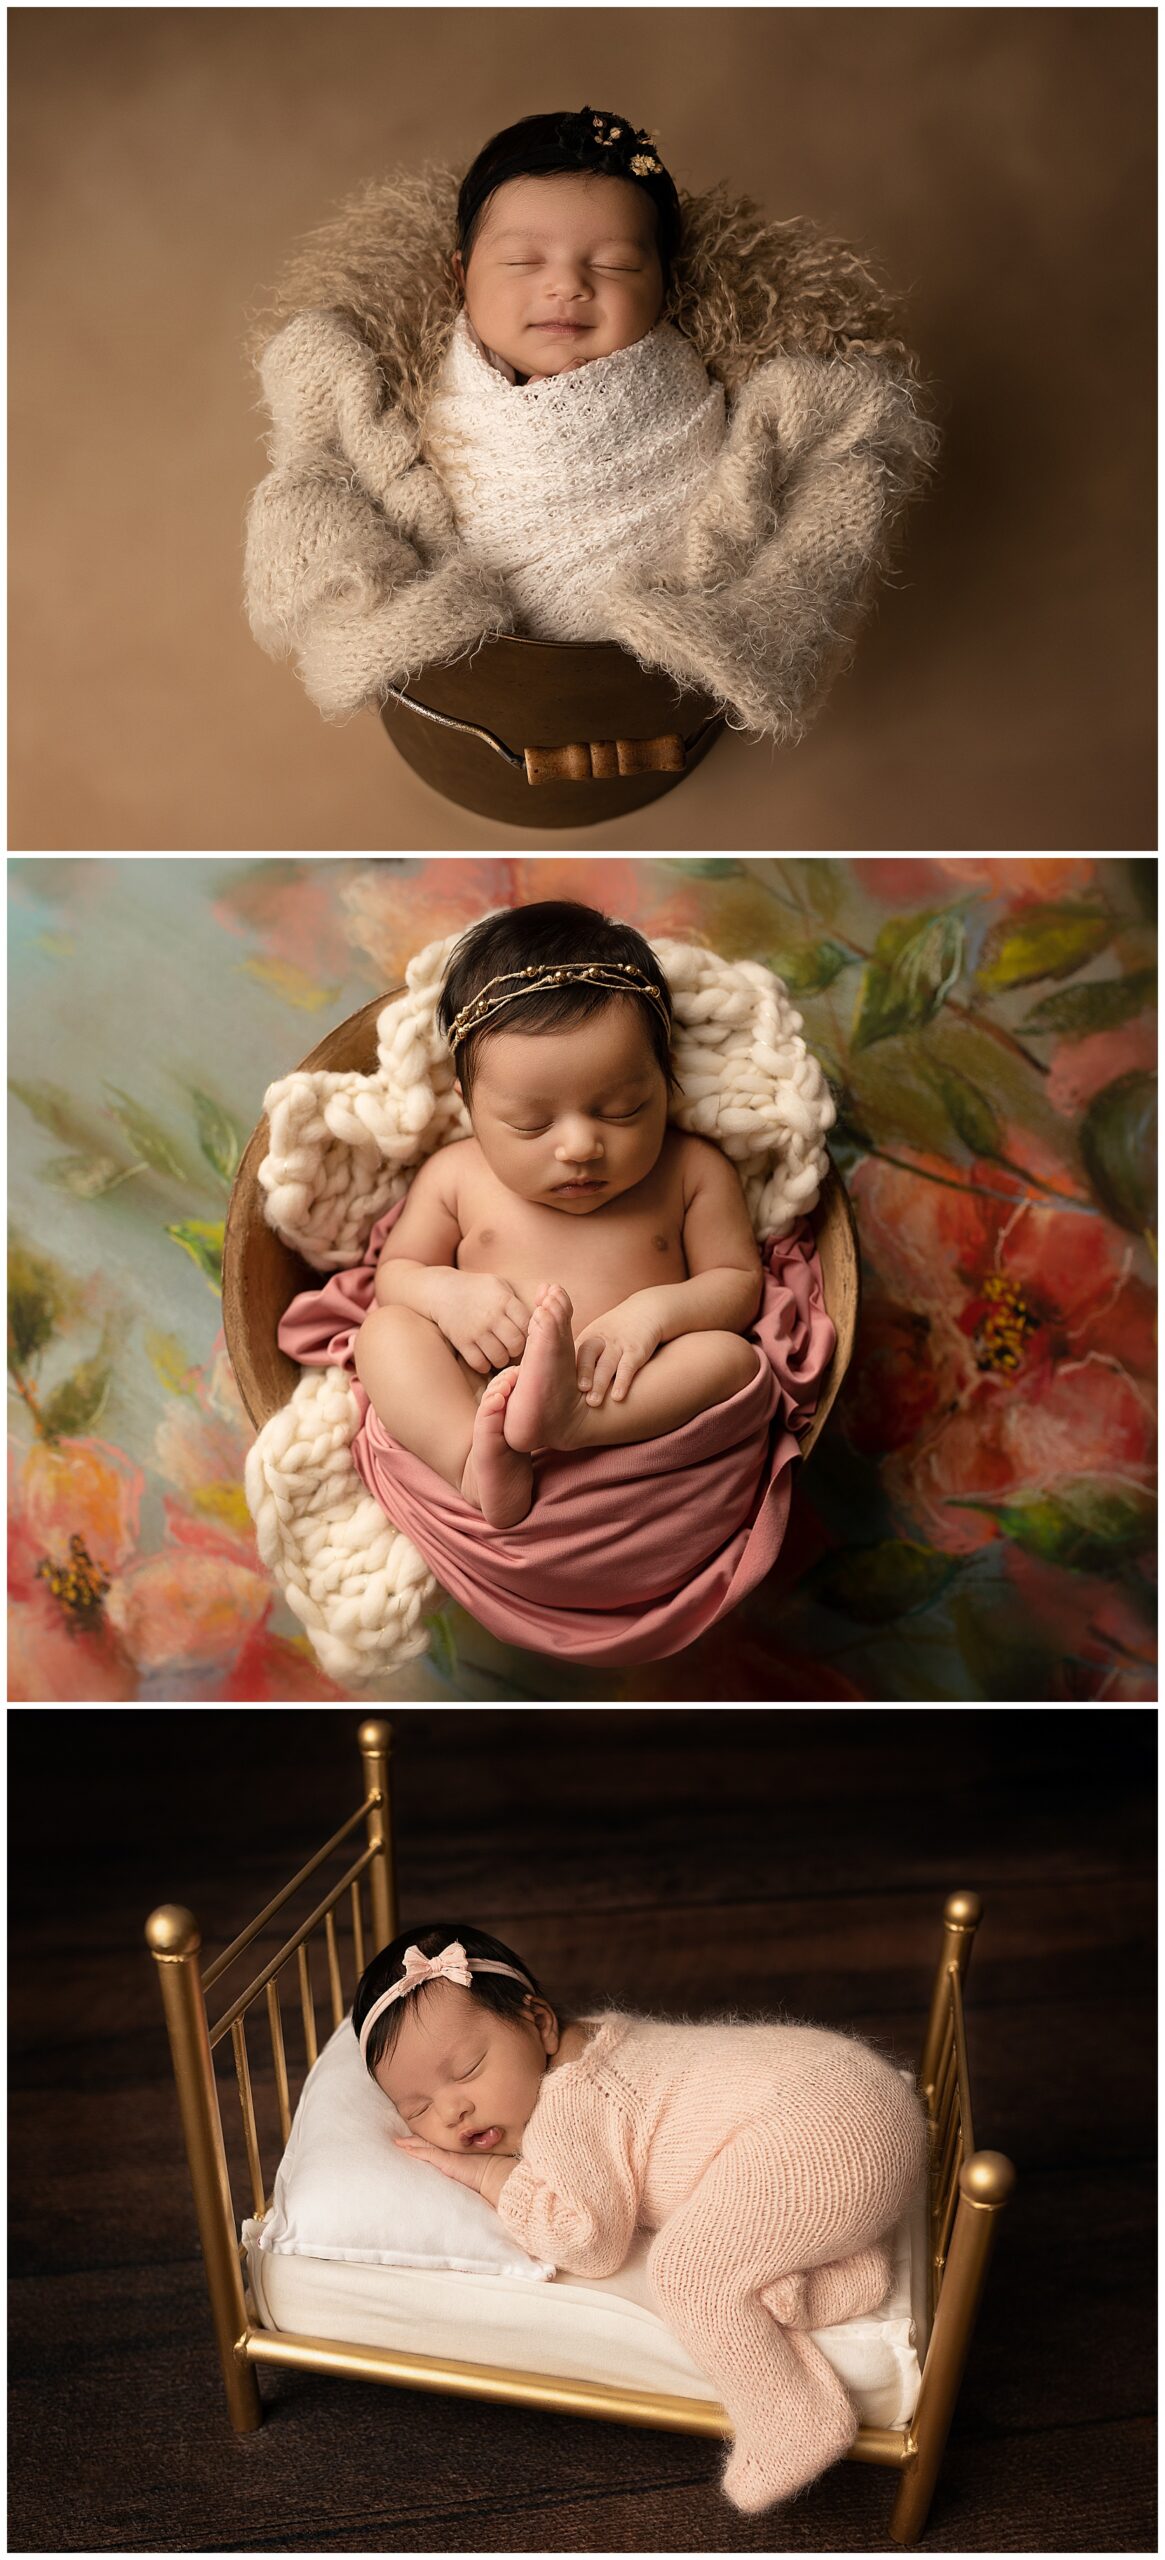 Newborn photo montage includes three photos of one newborn: One in a fur-lined basket, one in a basket on a floral background, and one on a small, brass bed.